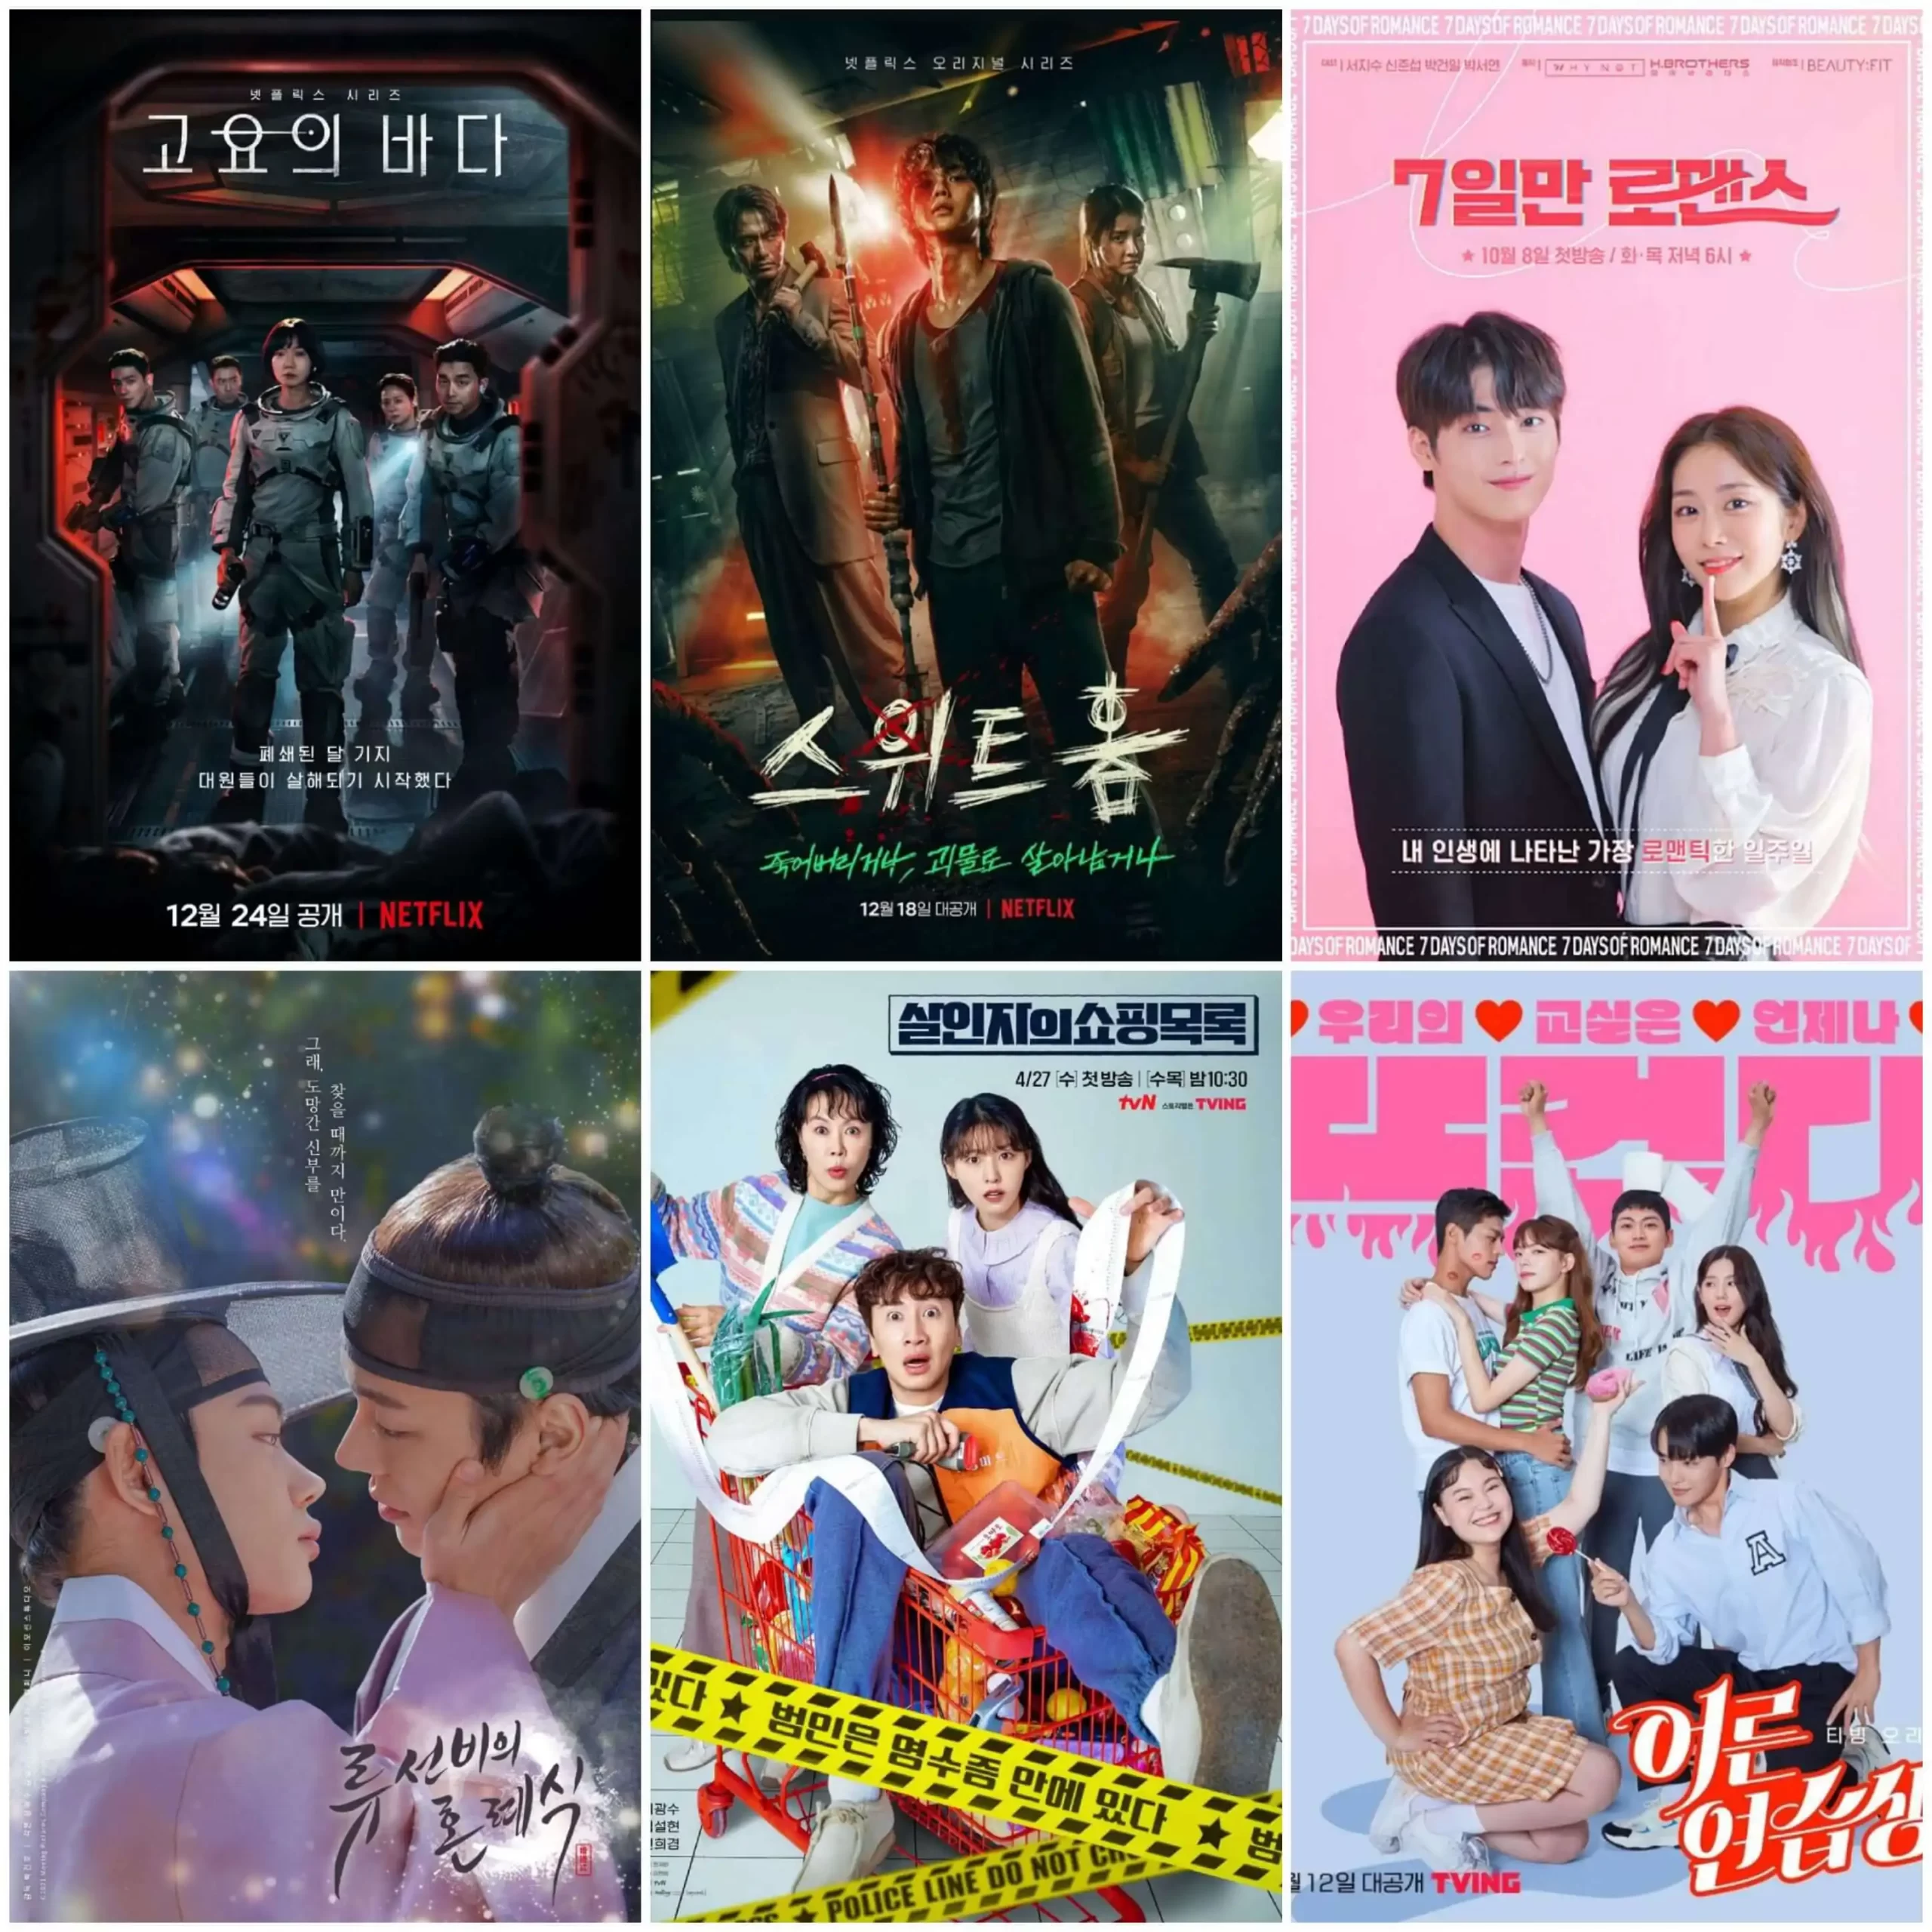 Kdramas with less than 10 episodes